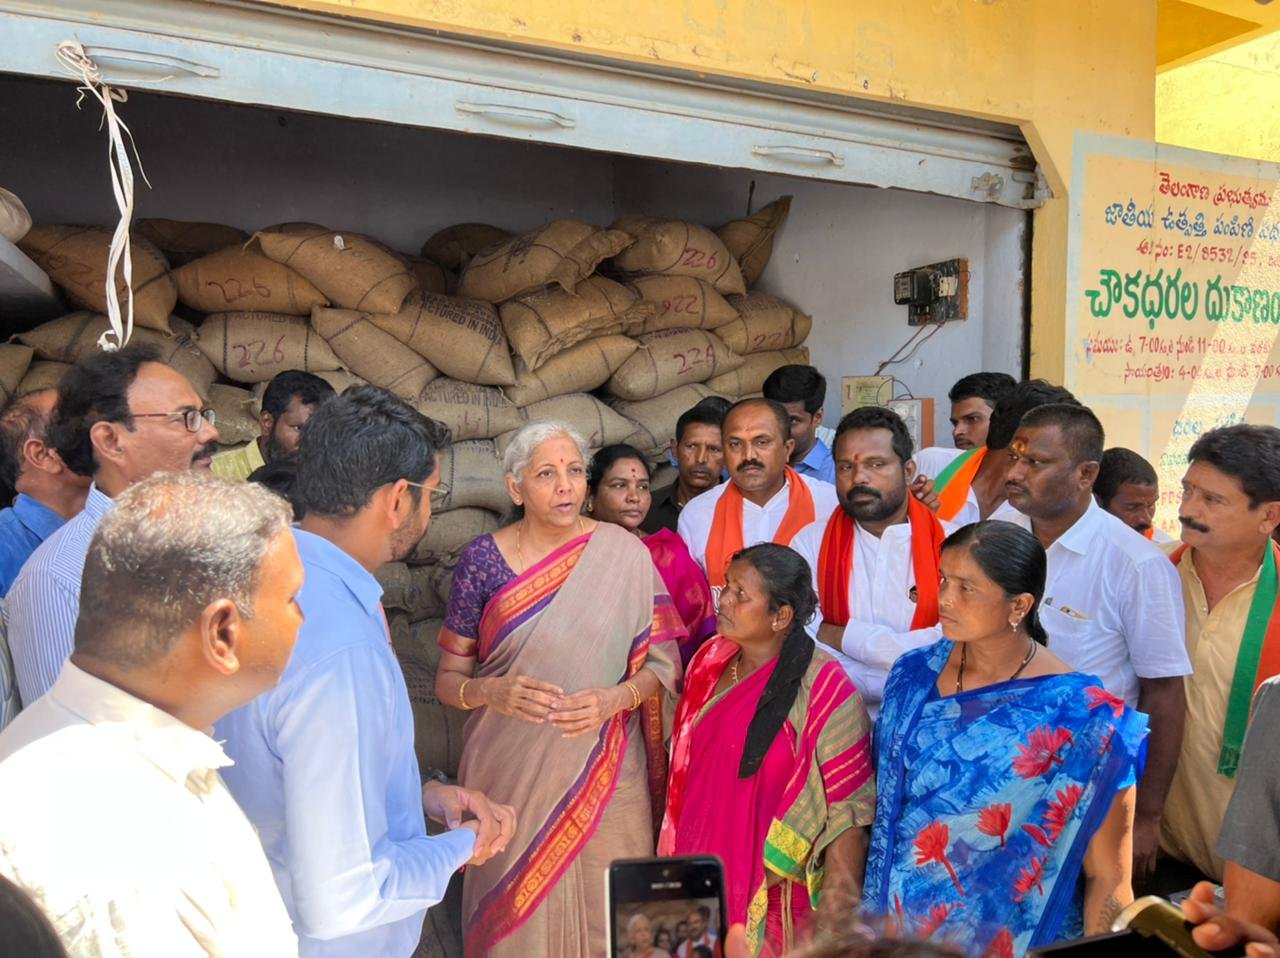 Union Minister Nirmala Sitharaman visits a ration shop at Birkoor village in Banswada town in Zaheerabad district on Friday, 2 Spetember. (@nsitharaman Twitter)